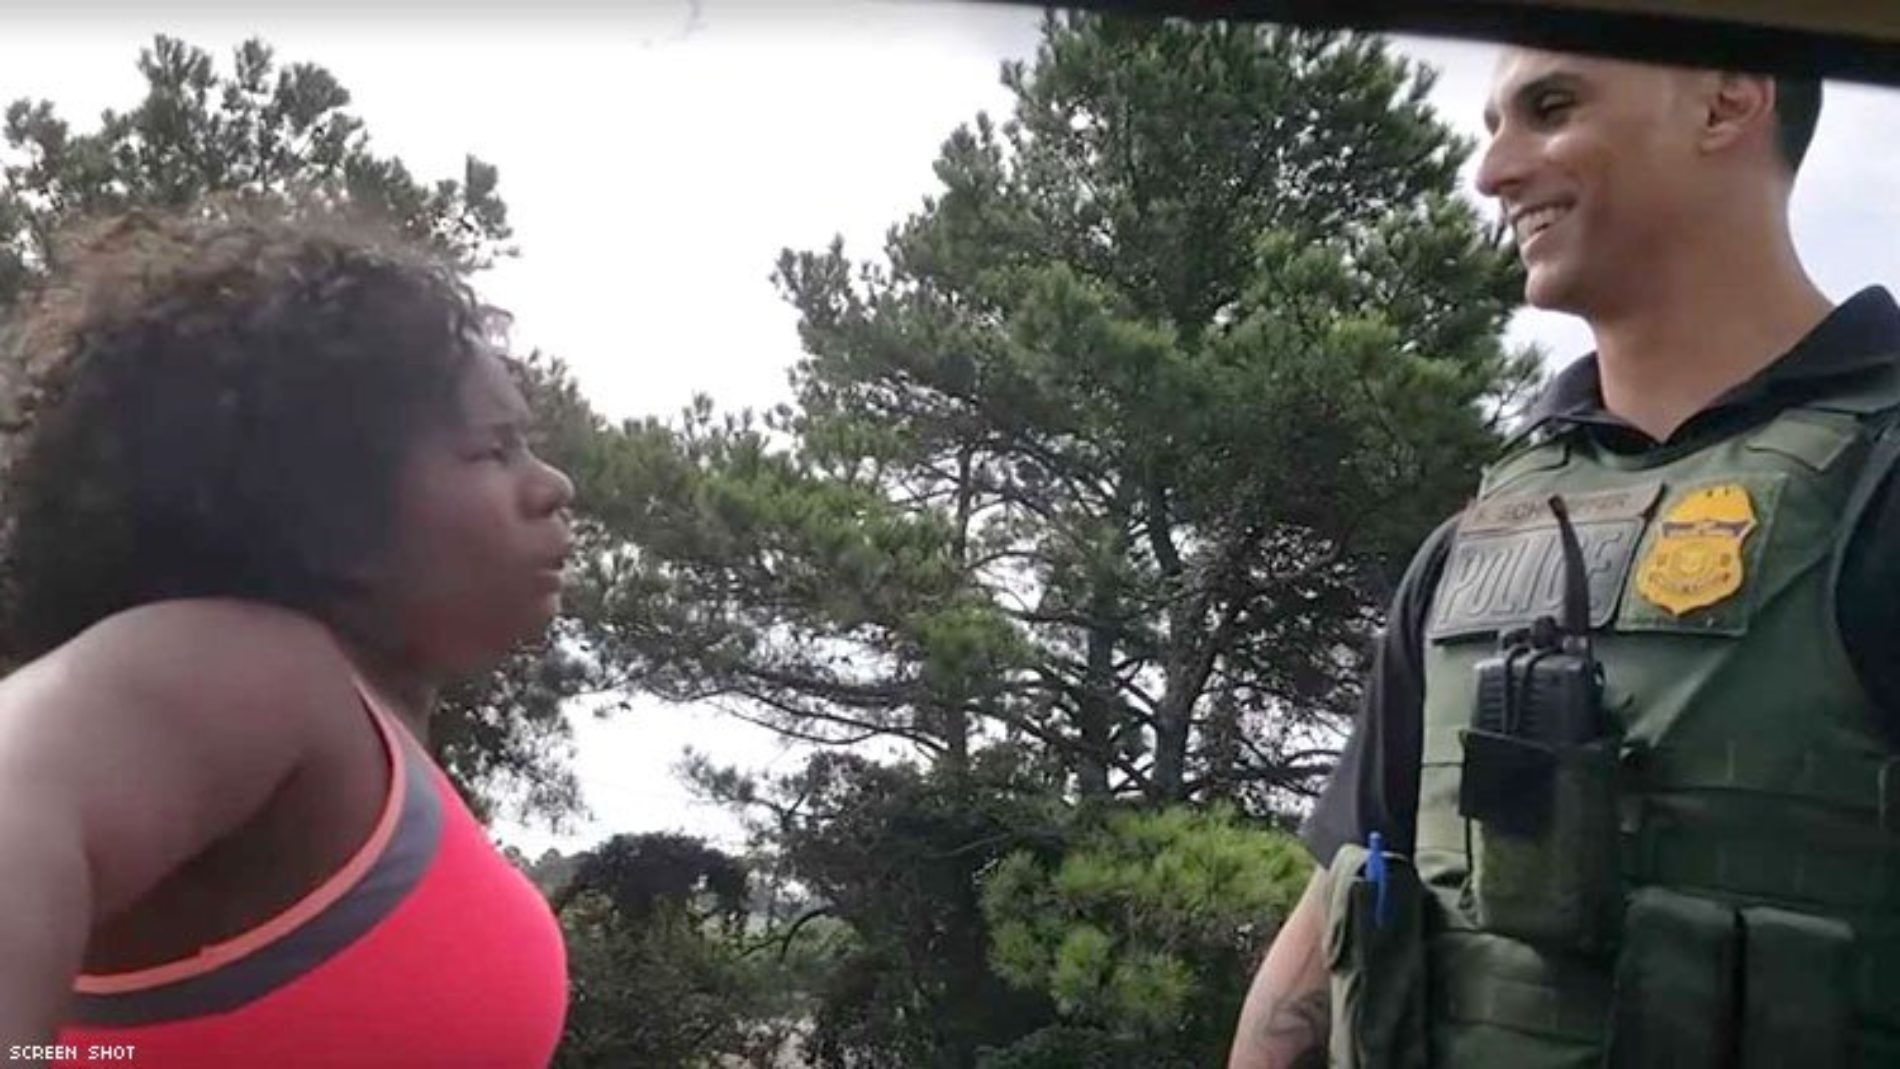 Woman Gets Pulled Over By ‘Hot’ Cop, Goes on Hilarious Rant